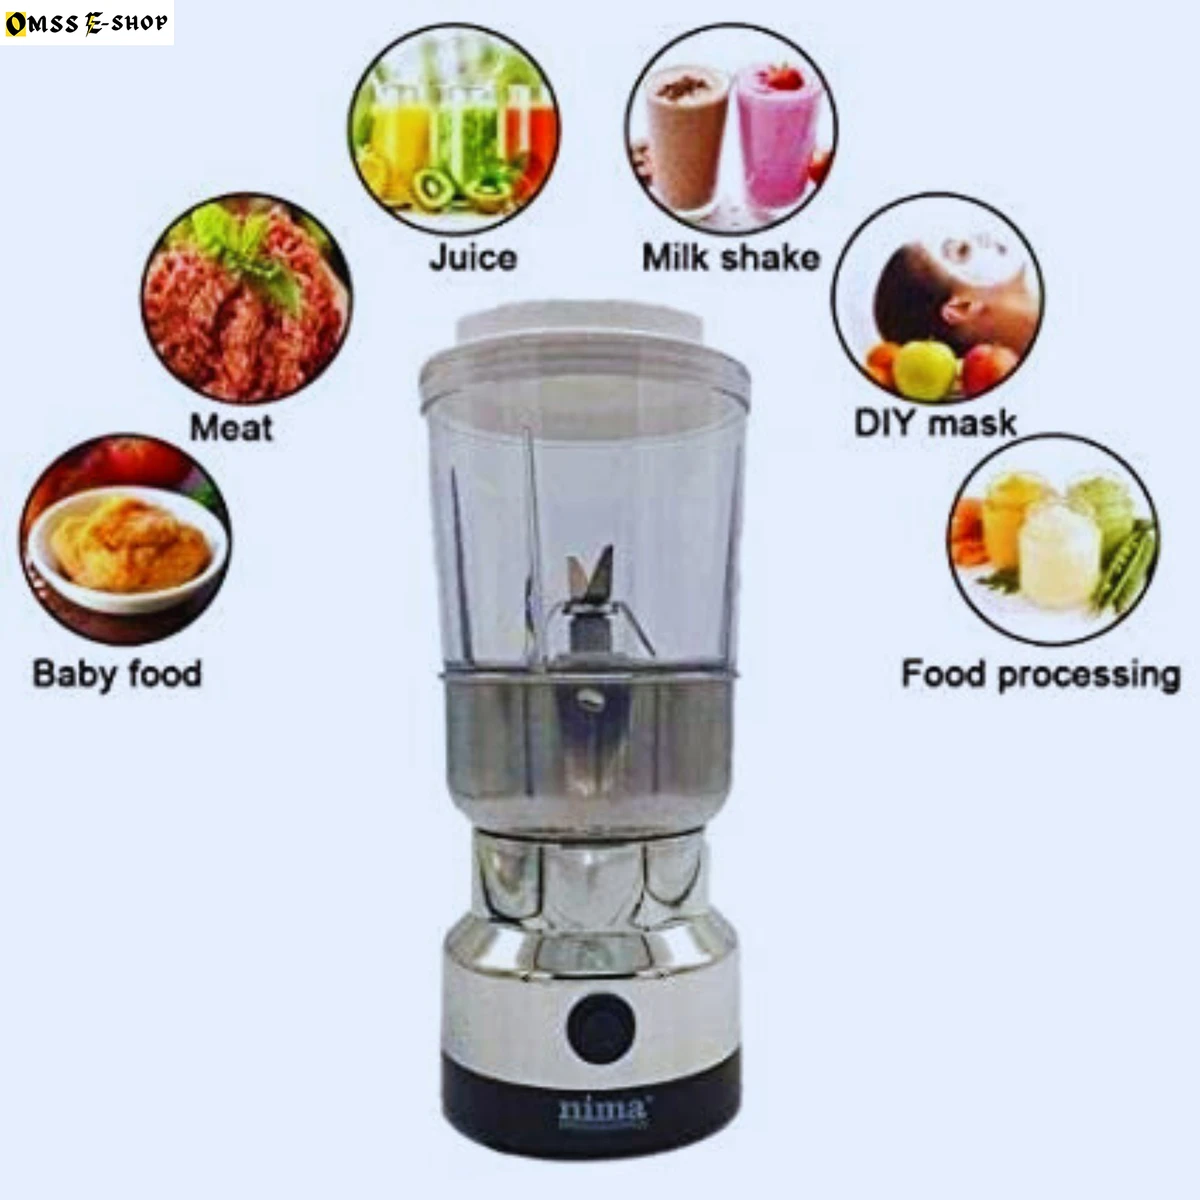 2-In-1 Nima Electric Grain Grinder and Juicer Stainless Steel Electric Spice Grinder, Corrosion Resistant Seed Herb Grinder, Mill Blender Kitchen Tool for Home